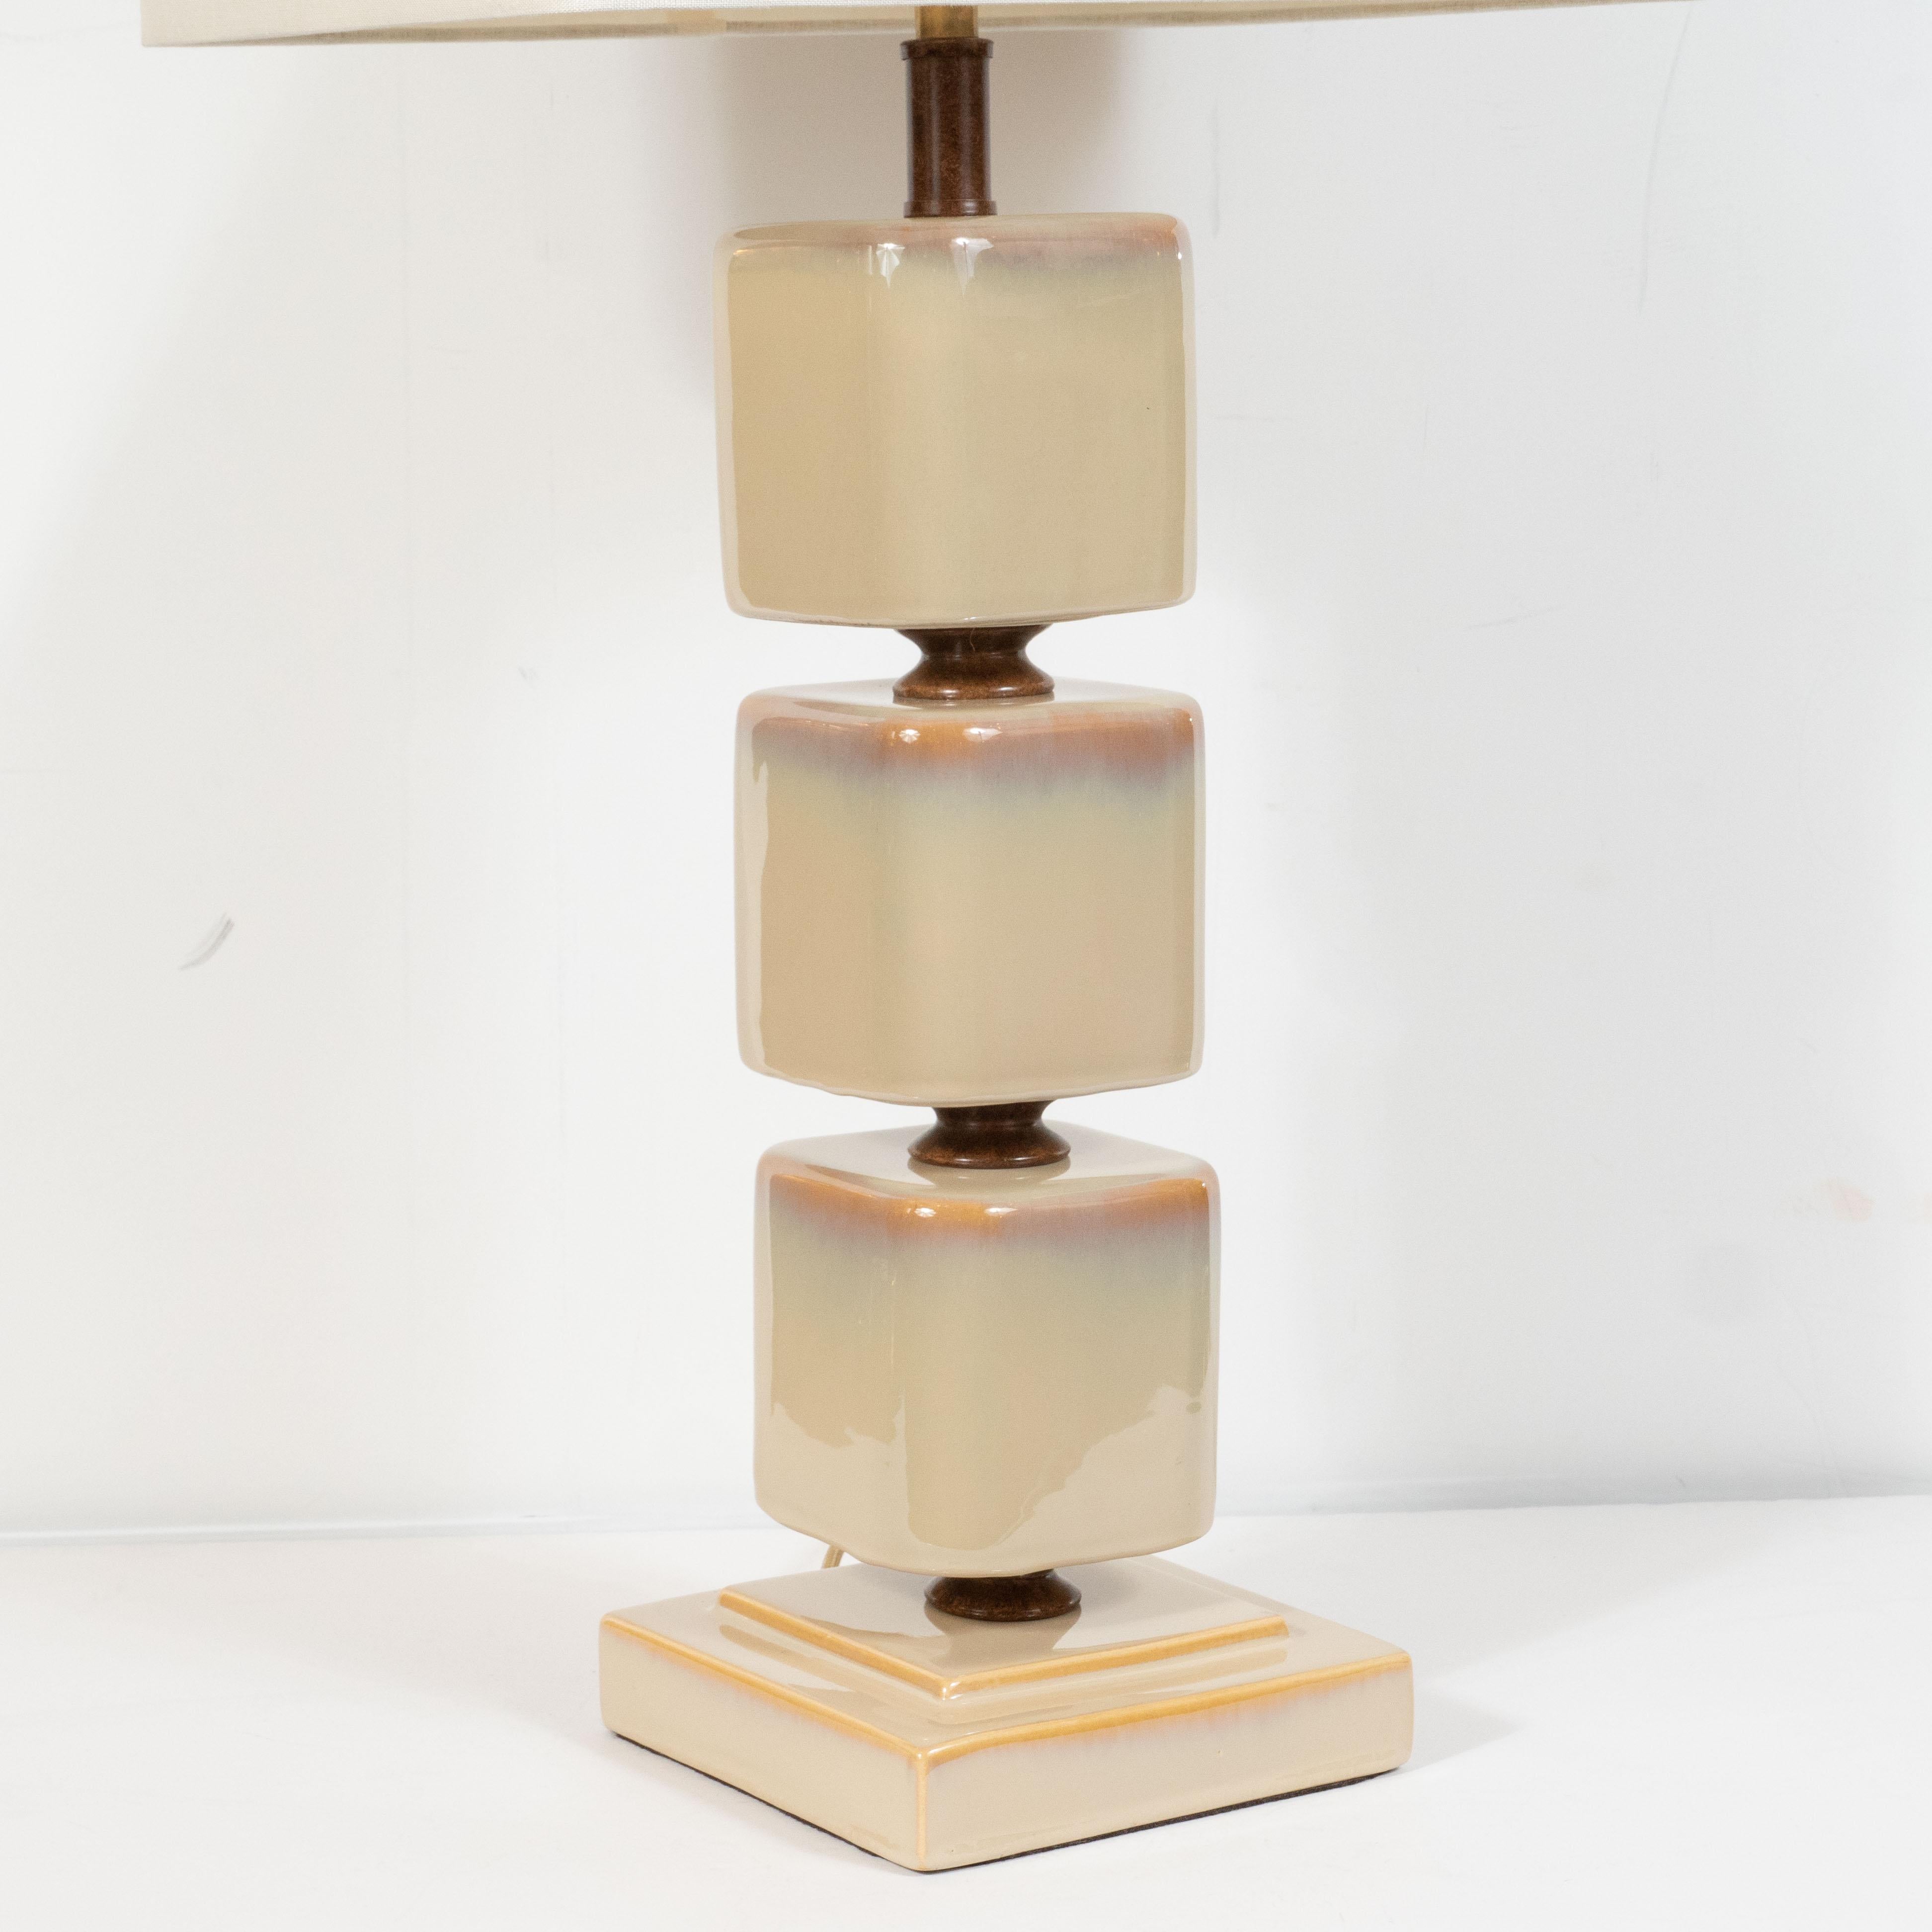 Pair of Mid-Century Modern Ceramic Pearlescent Cube Table Lamps 1